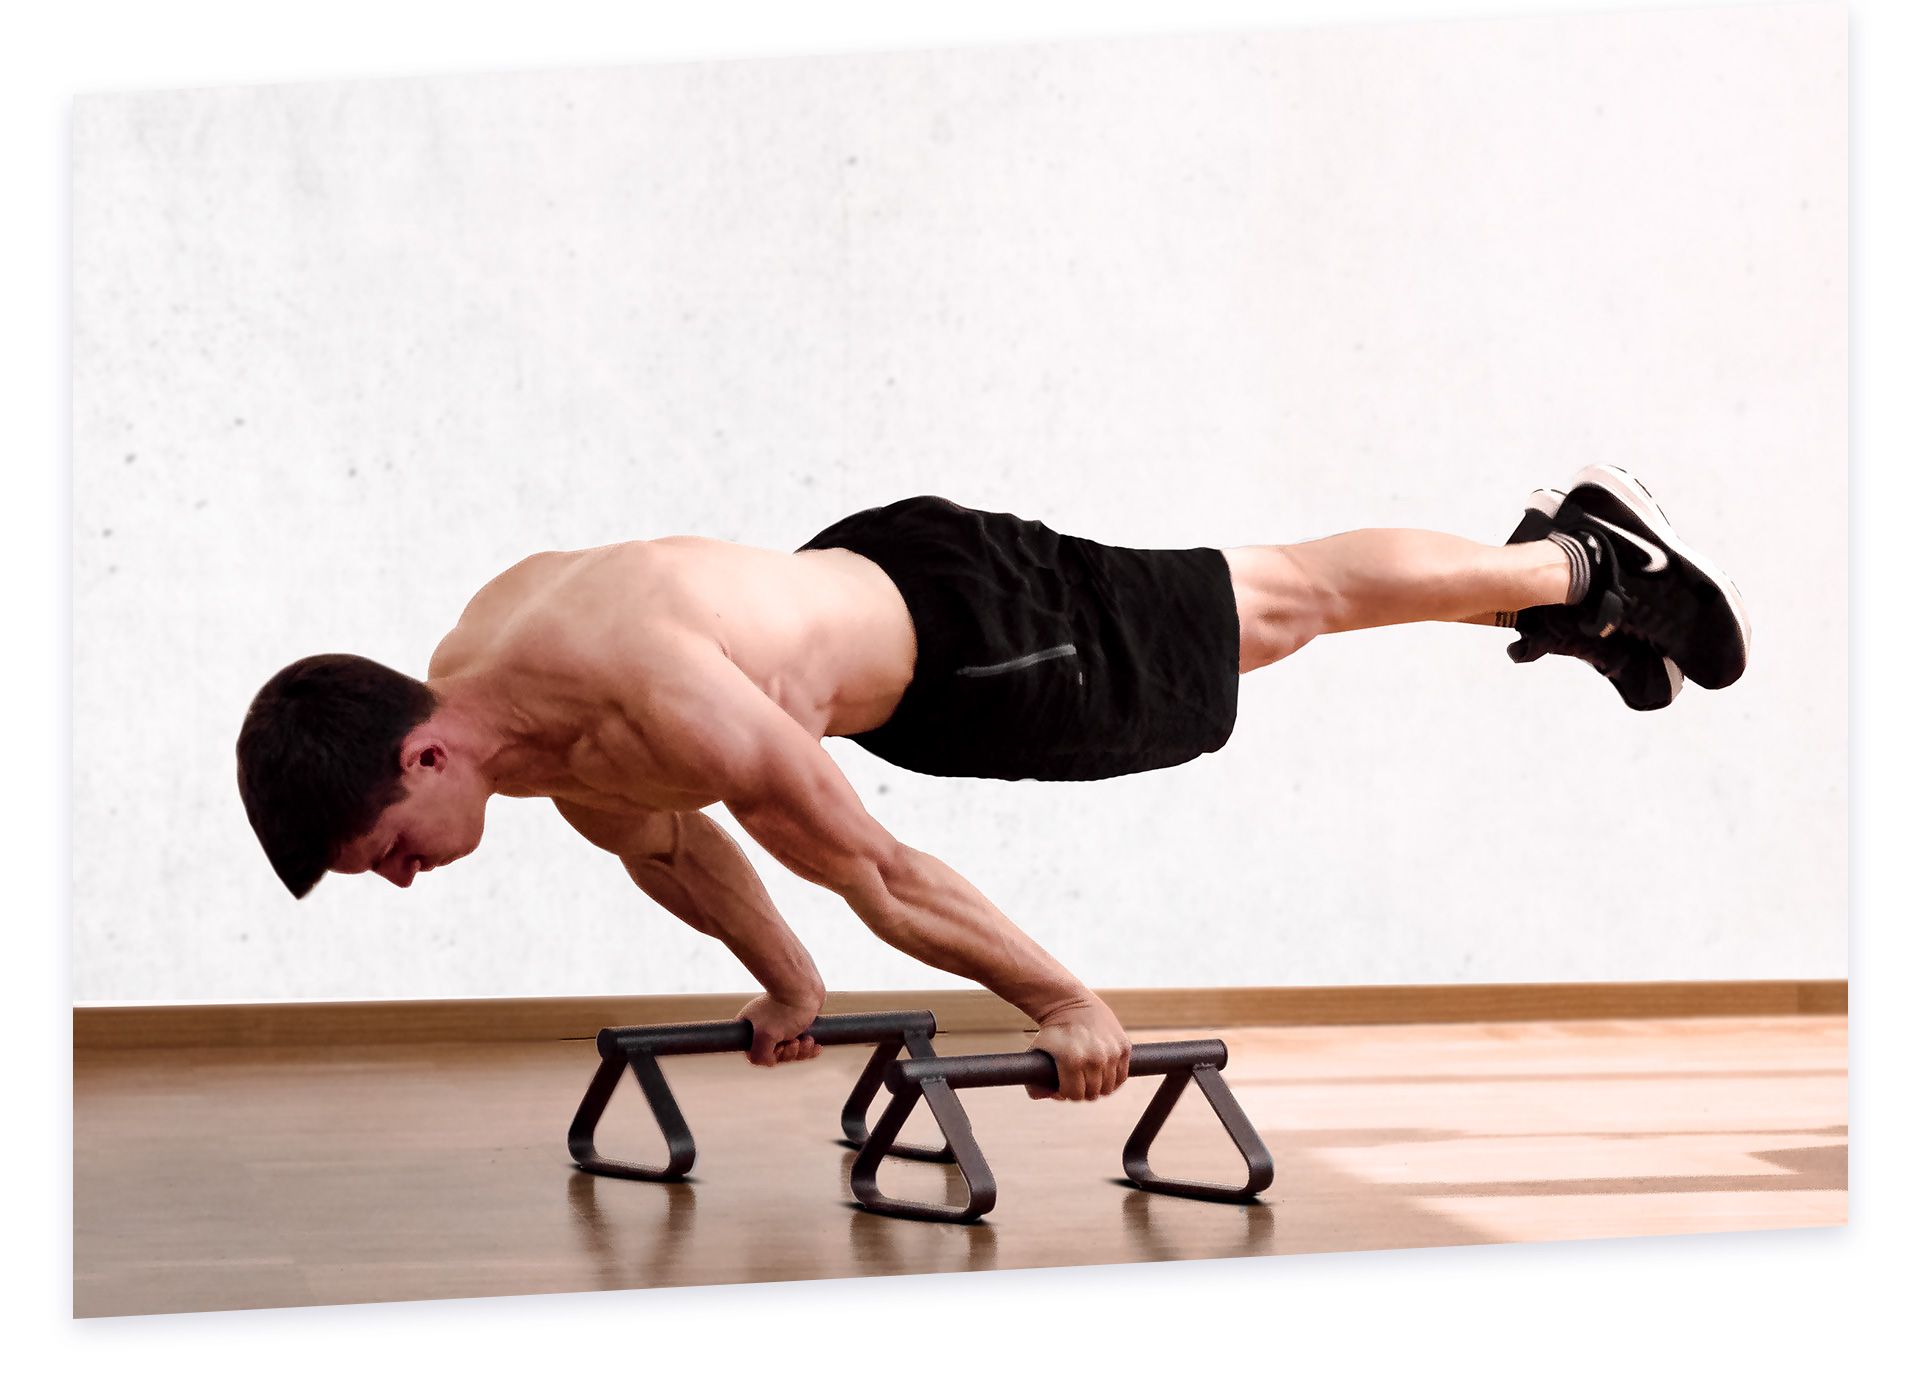 Bodyweight - One bodyweight skill to rule them all? | The Forum